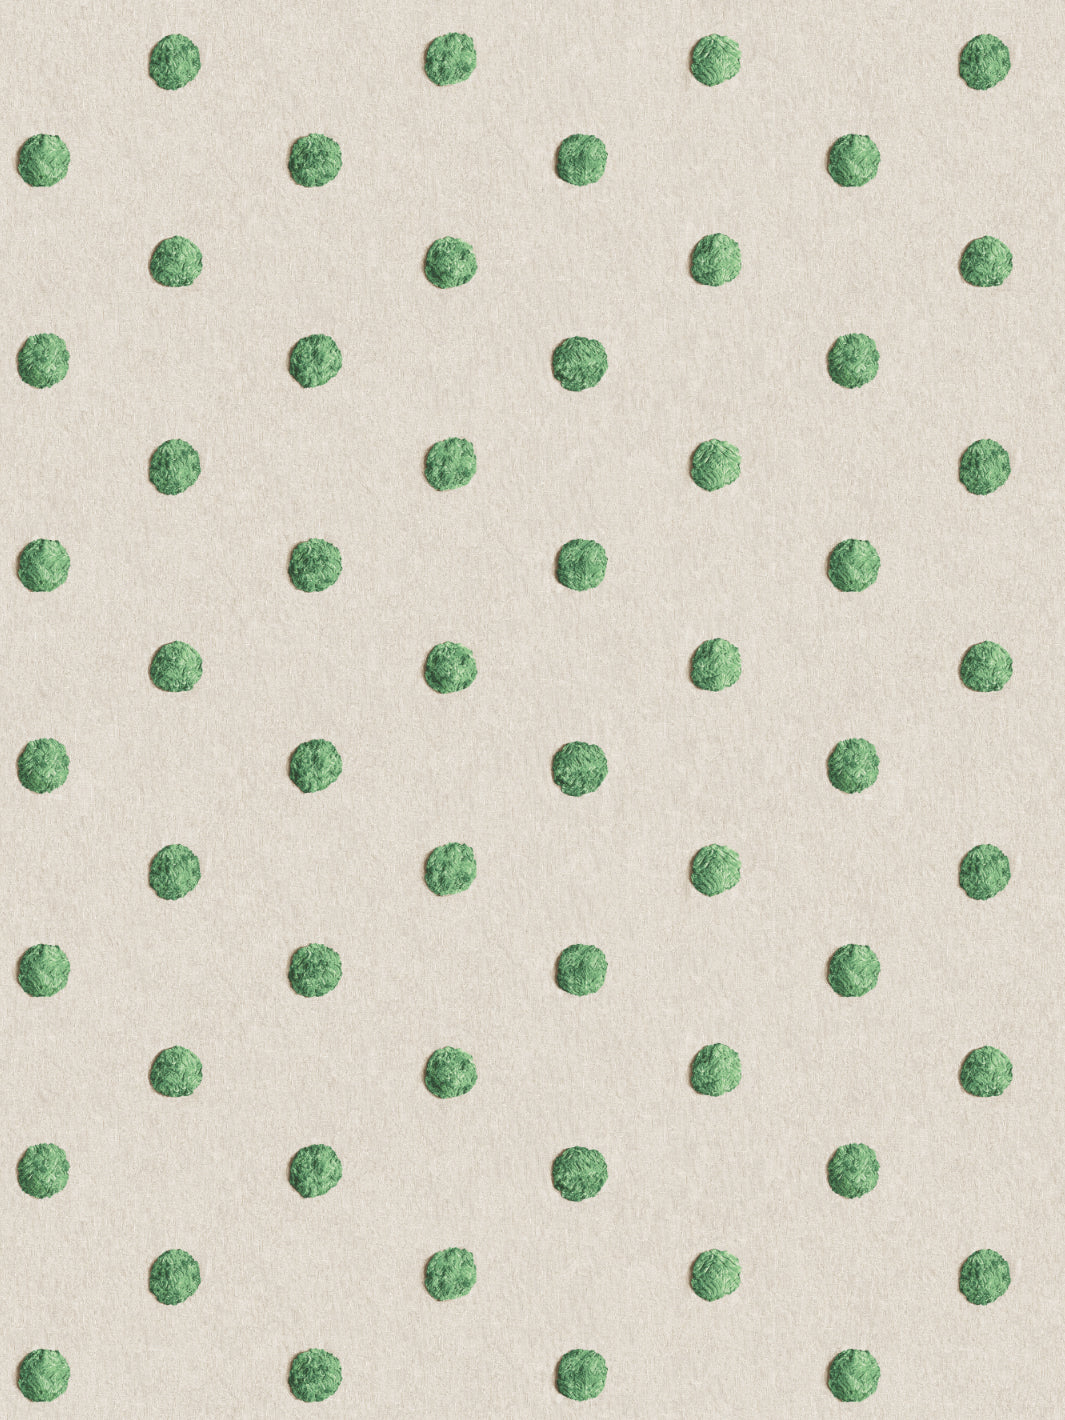 'Chenille Dots Small' Wallpaper by Chris Benz - Green